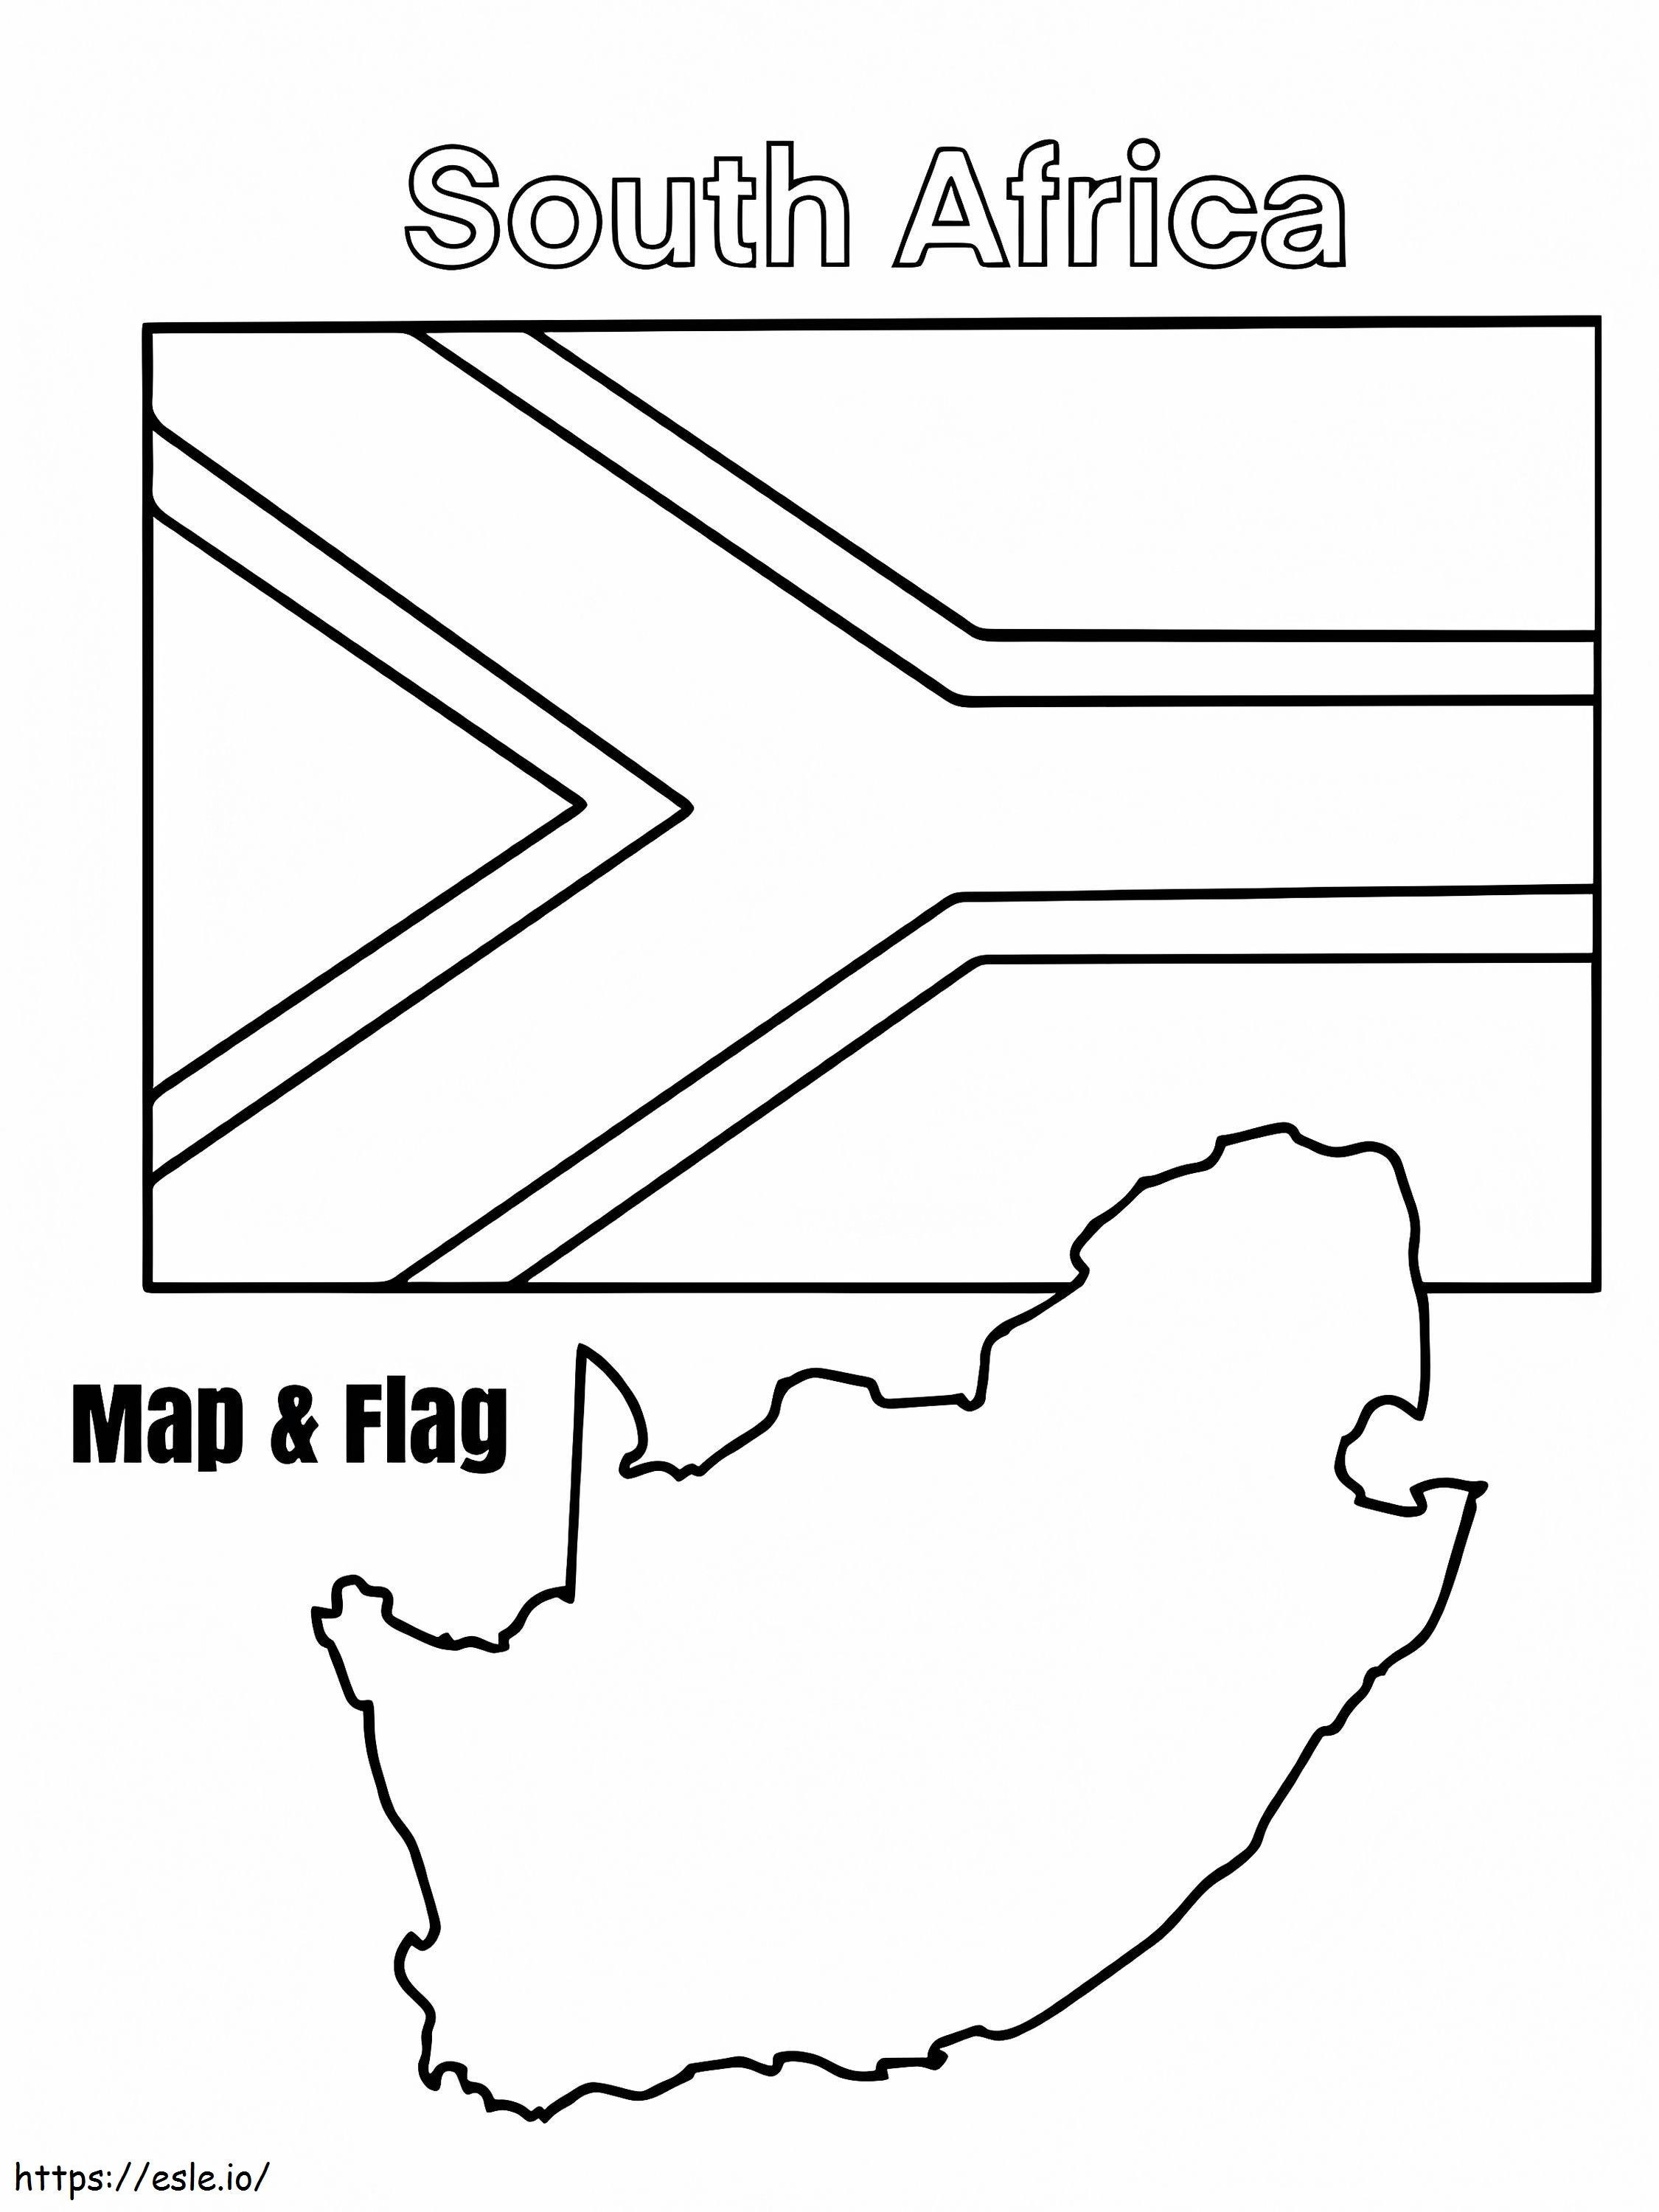 South Africa Flag And Map coloring page